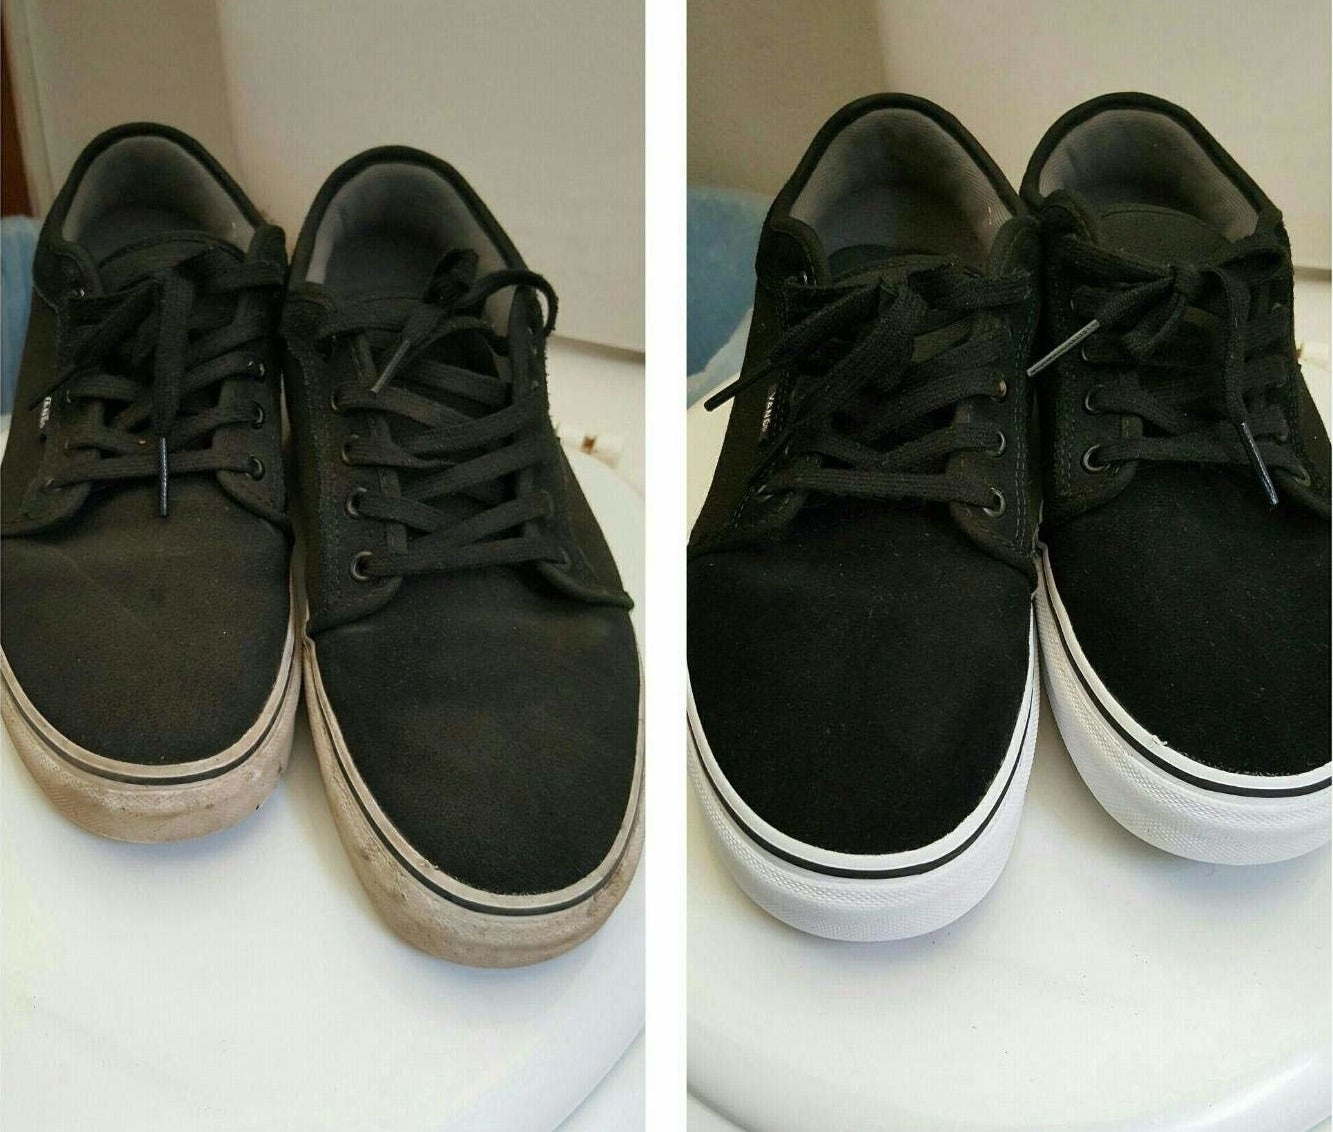 A before-and-after photo showing dirty shoes and clean shoes